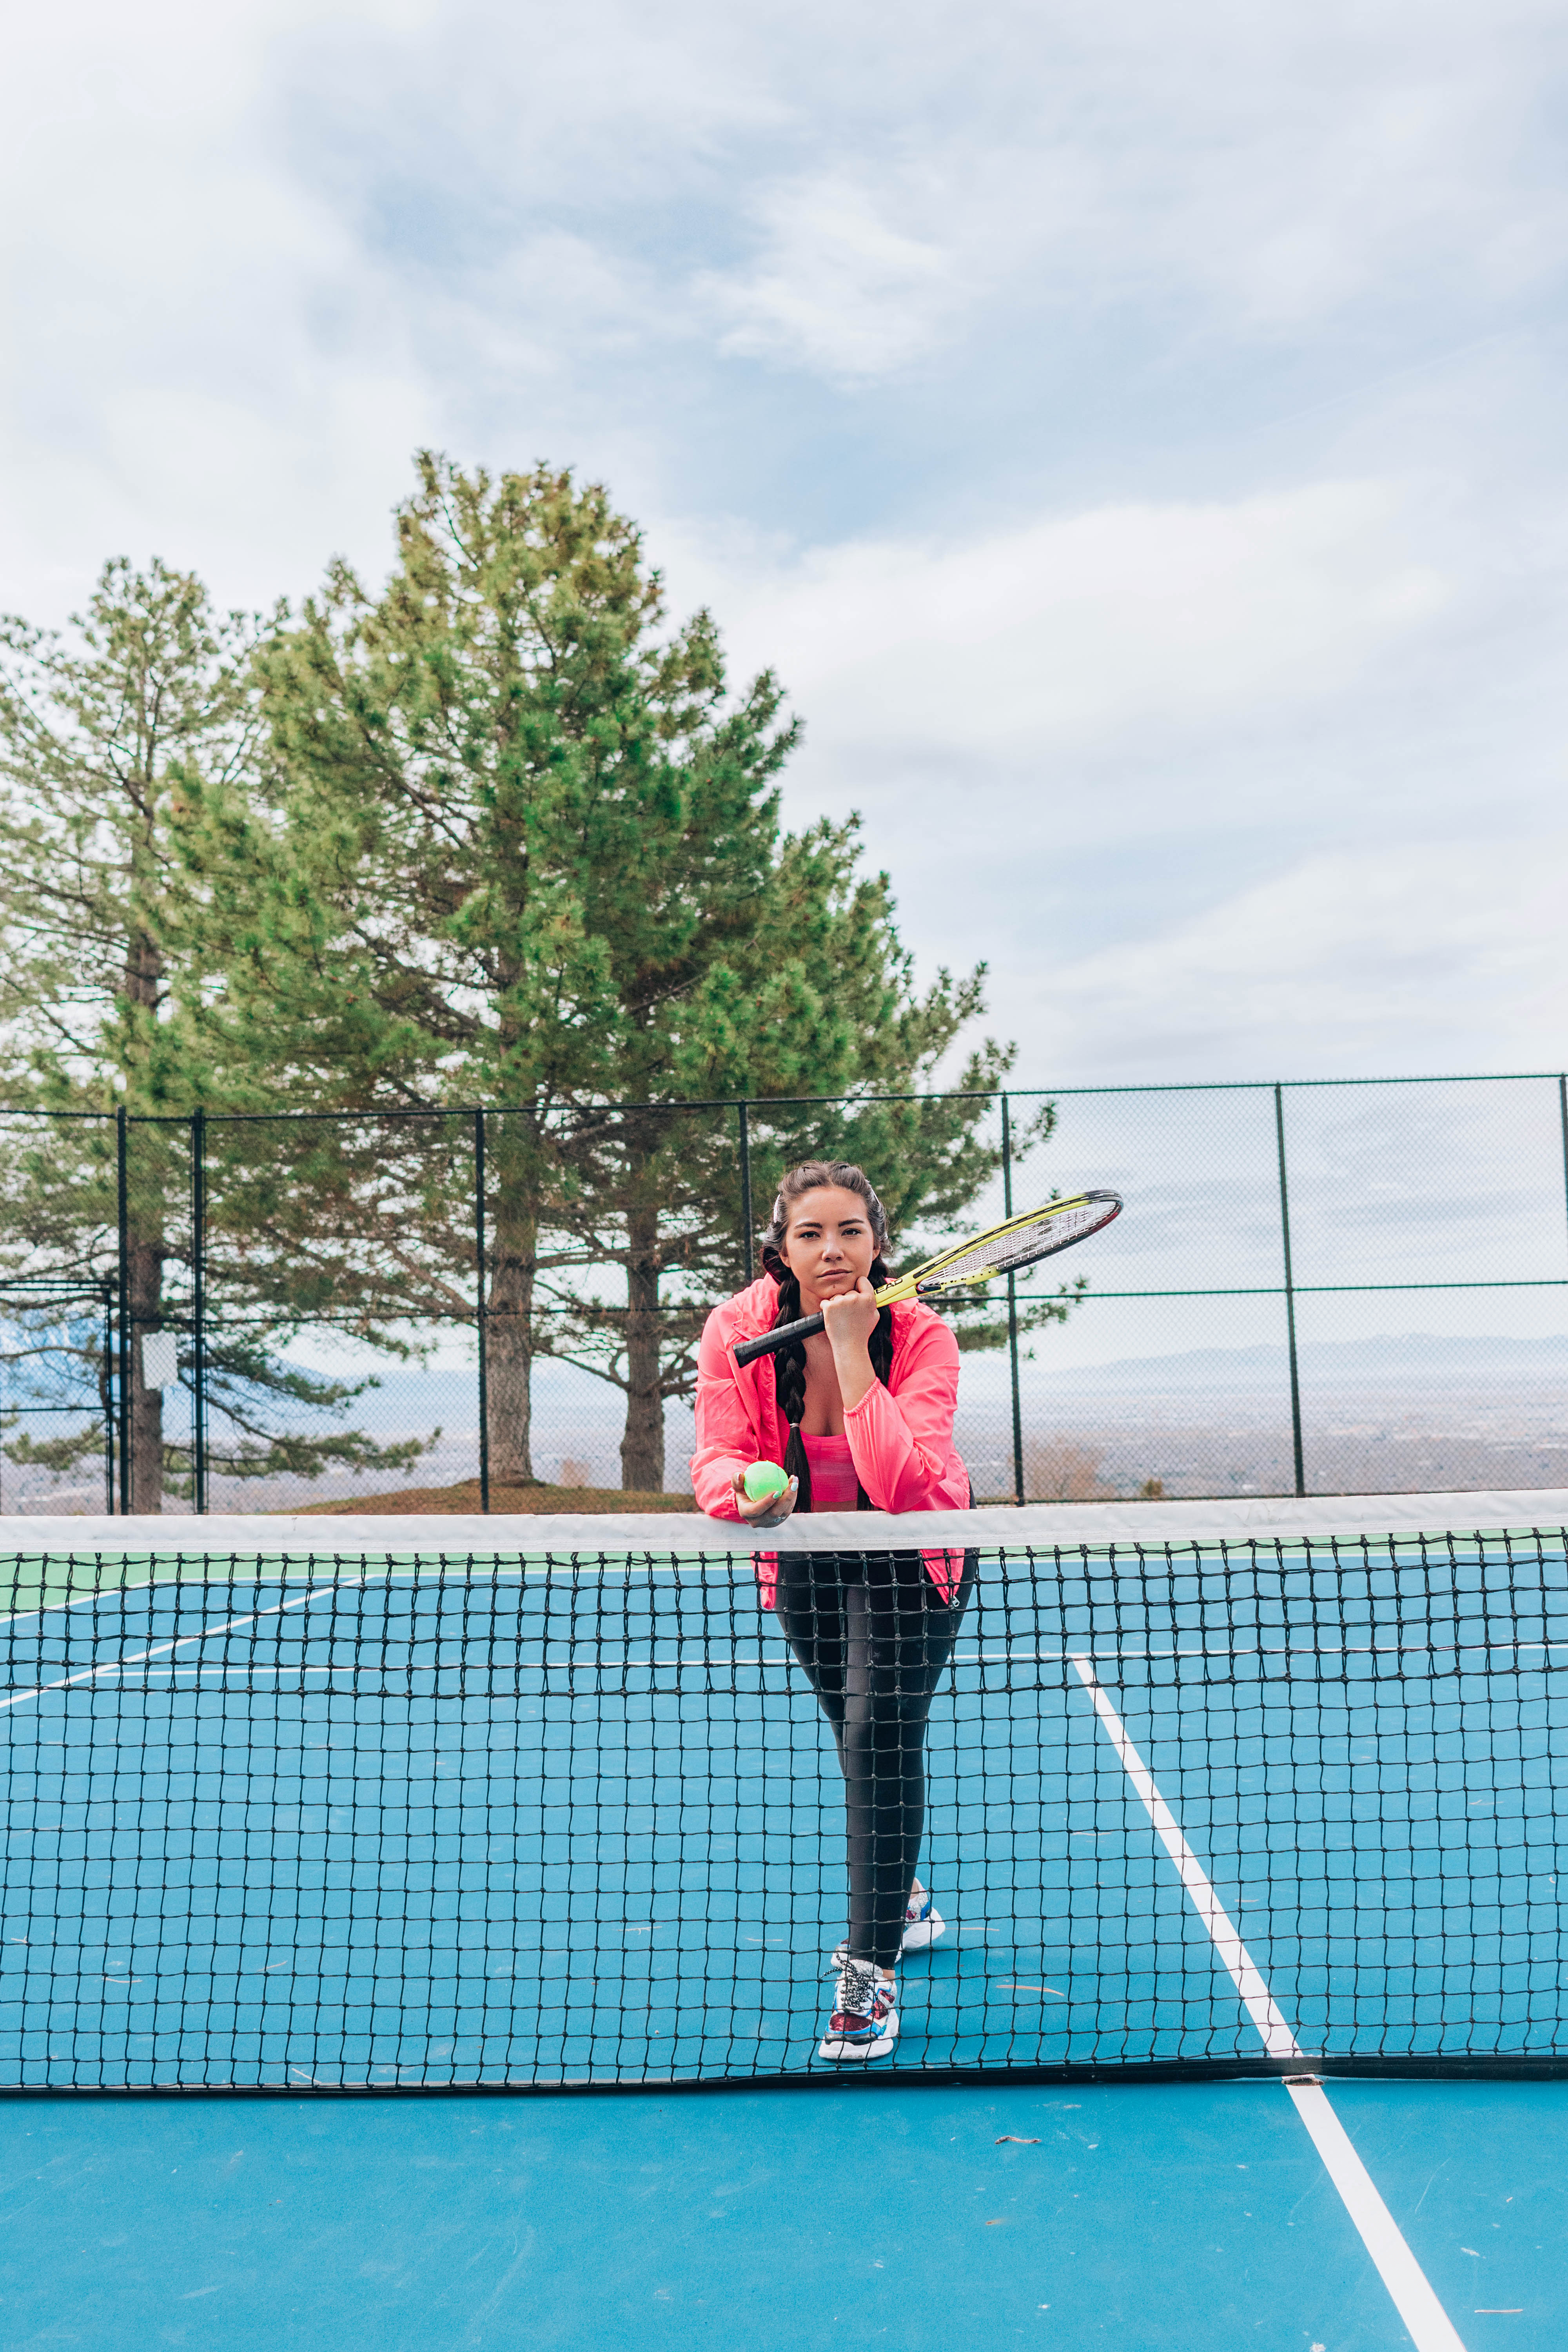 Woman wearing a pink jacket and workout clothing leaning on a tennis net holding a ball